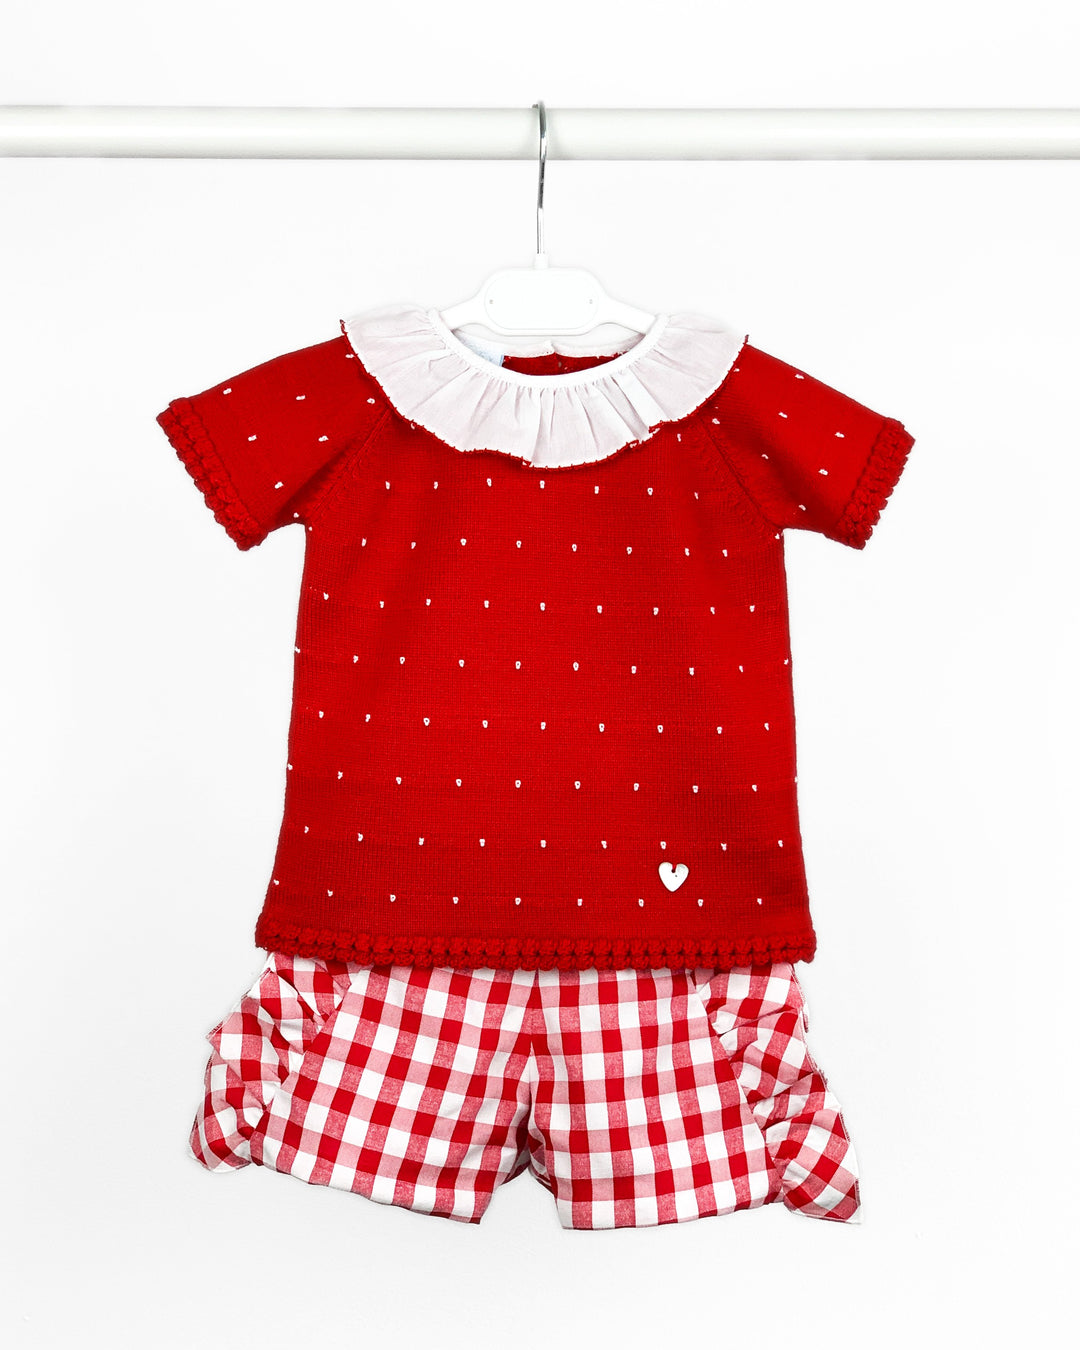 Granlei "Aubree" Red Knit Gingham Top & Shorts | Millie and John